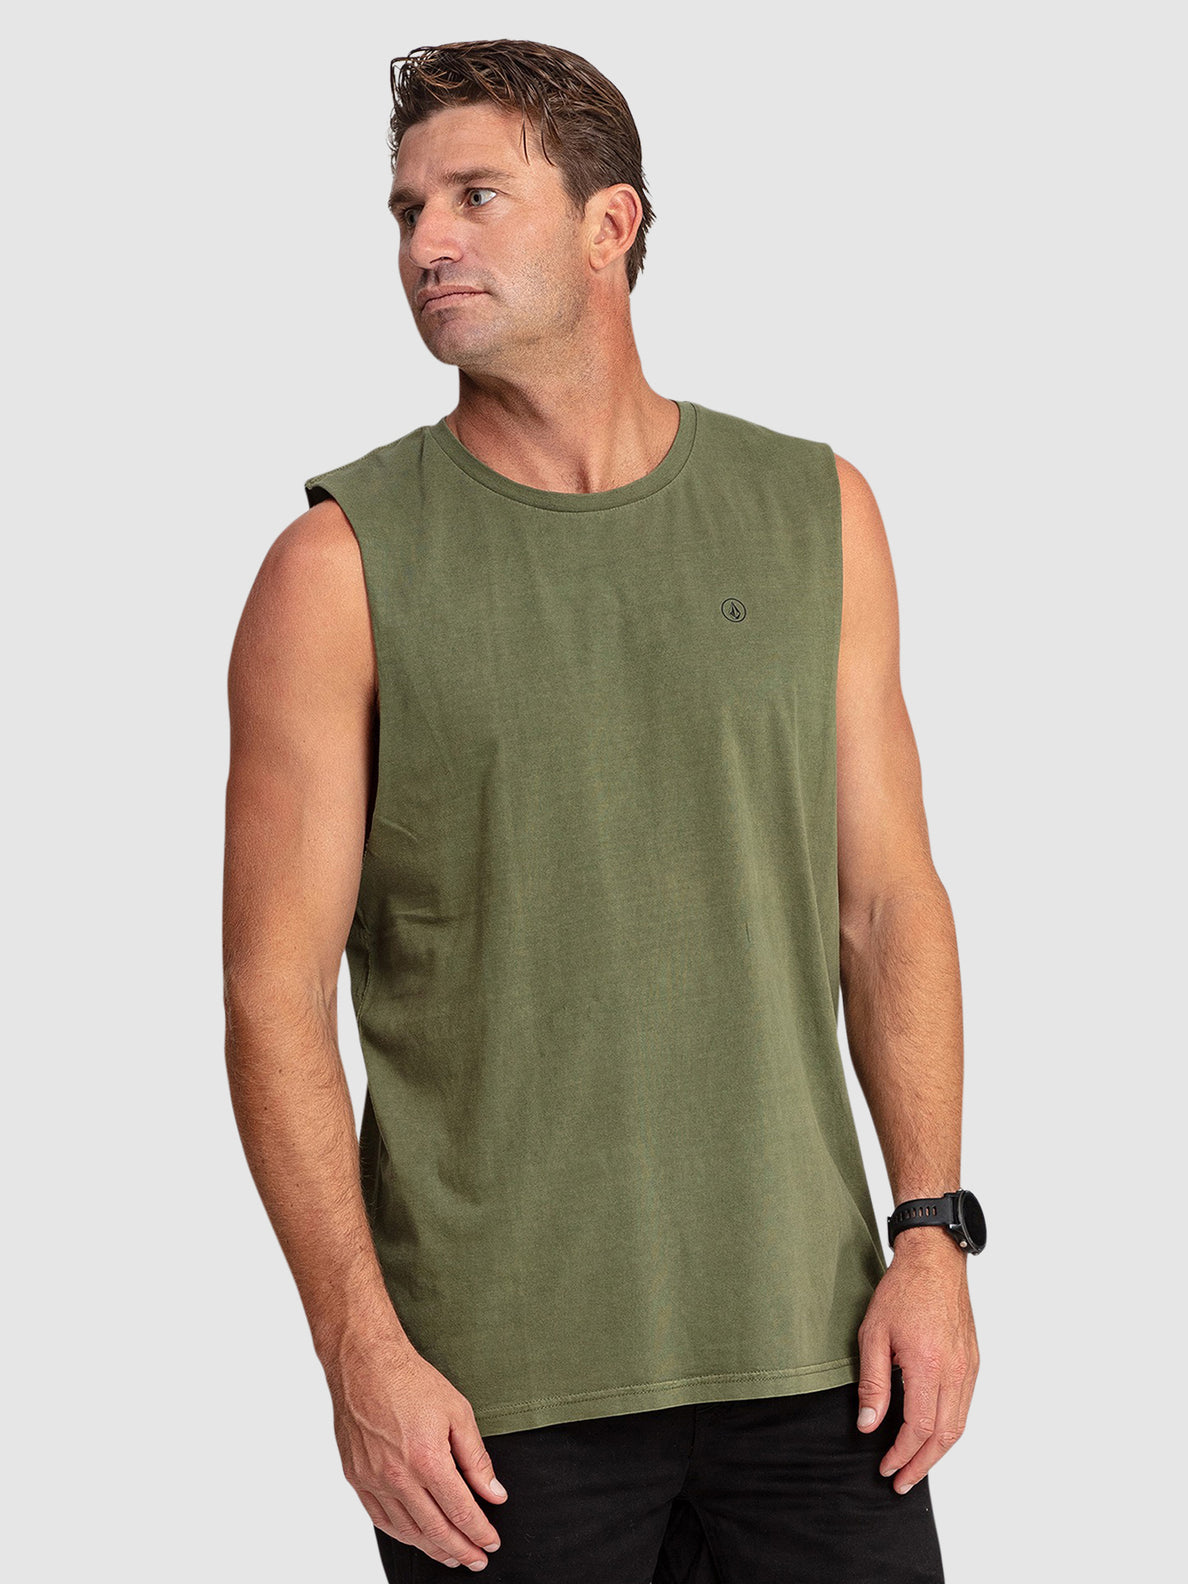 Aus Wash Muscle Tank - Army Combo